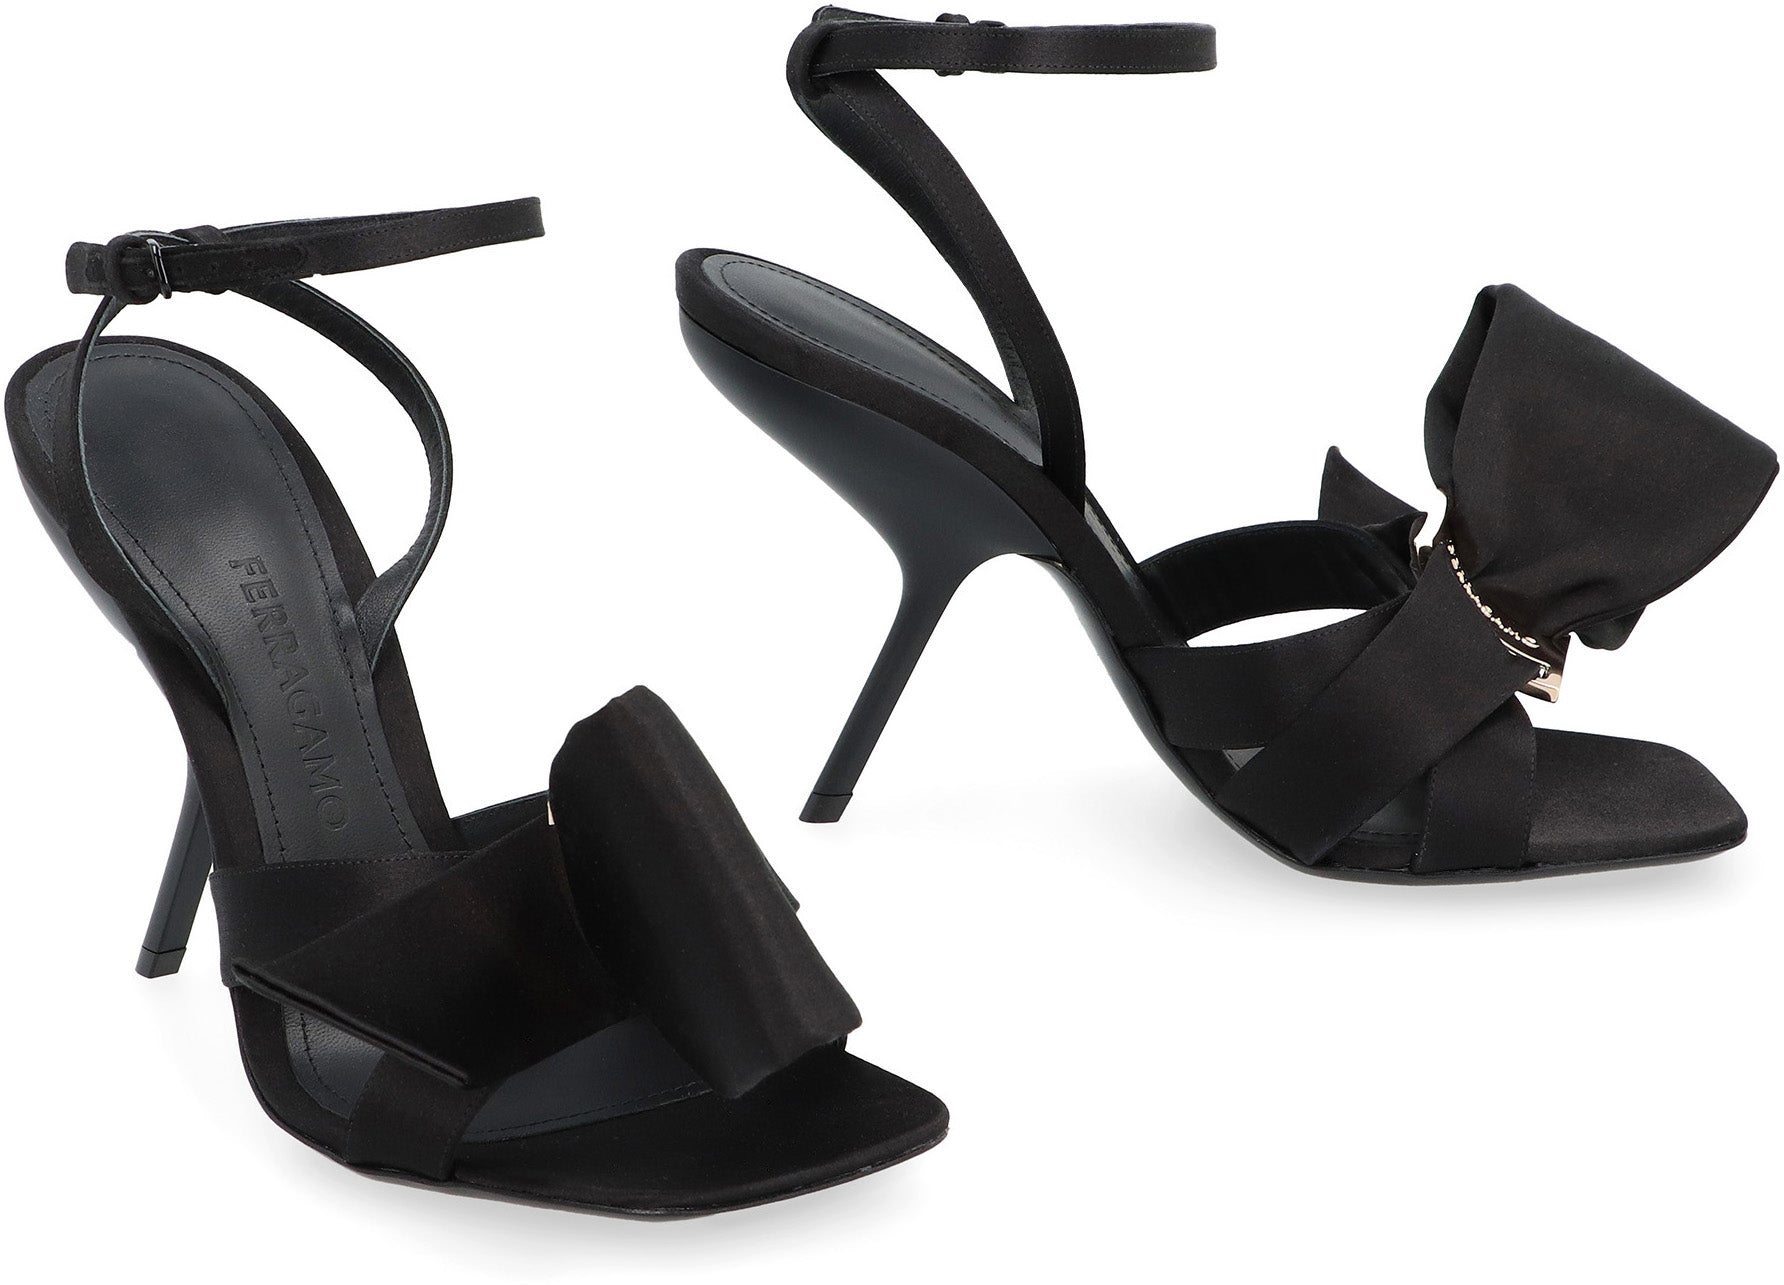 Shop Ferragamo Black Satin Sandals With Front Bow And Adjustable Ankle Strap